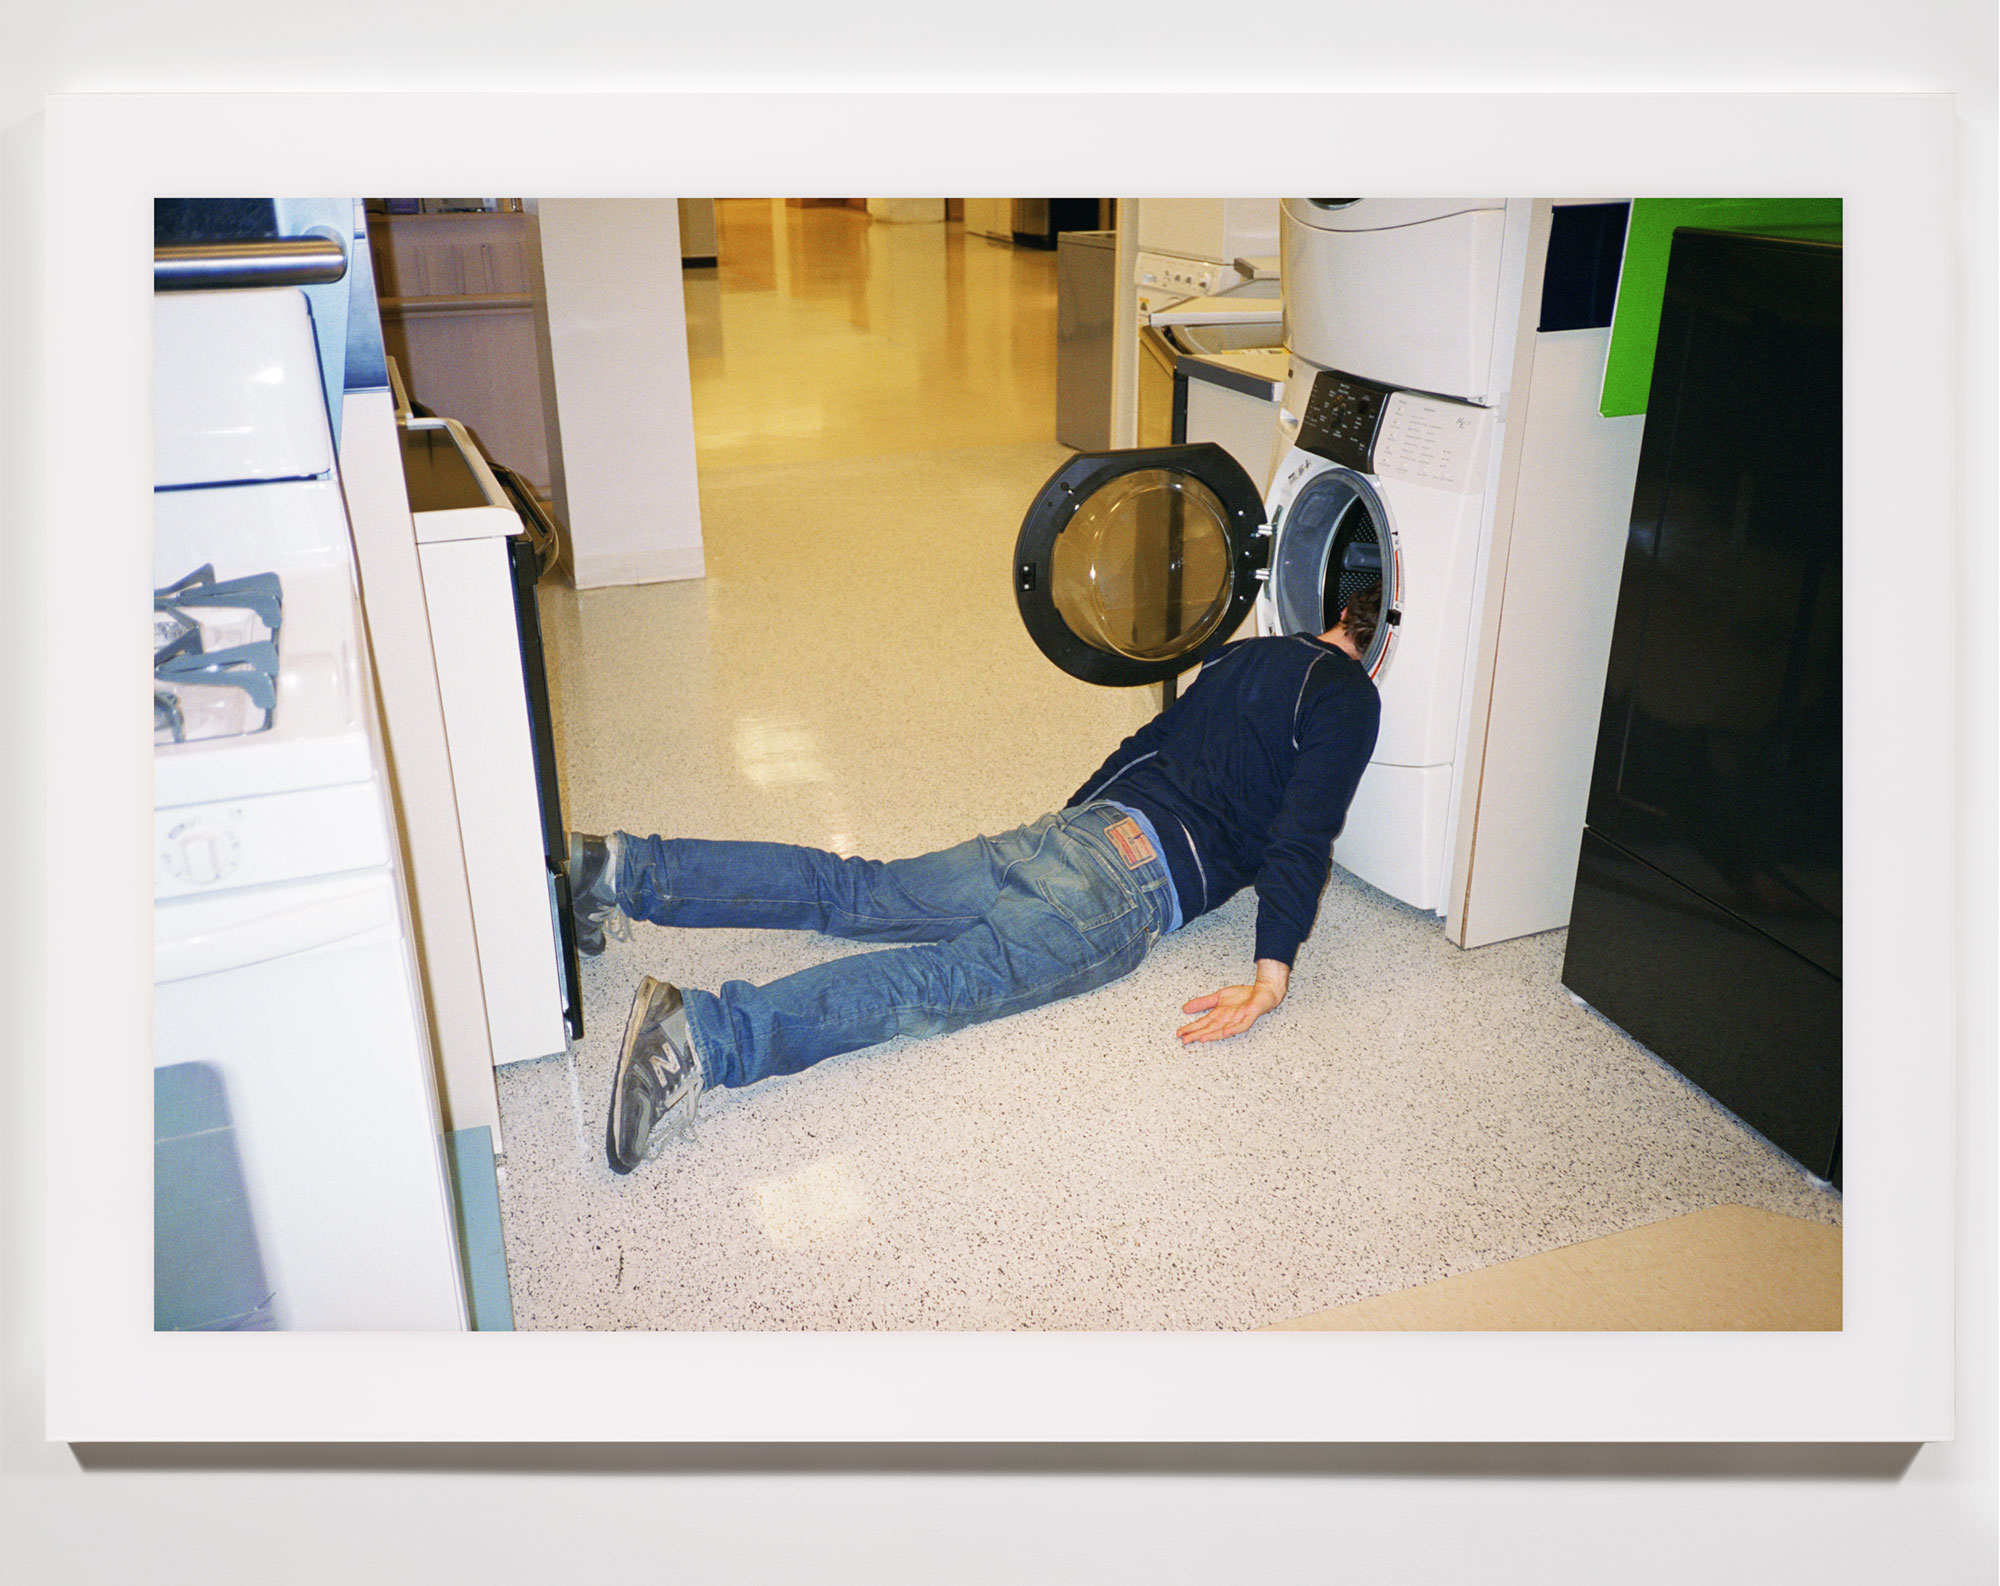   The Phenomenology of Shopping (Sears, Westfield Mall, Bridgeport, CT)    2002   Chromogenic print  68 x 47 3/4 inches    